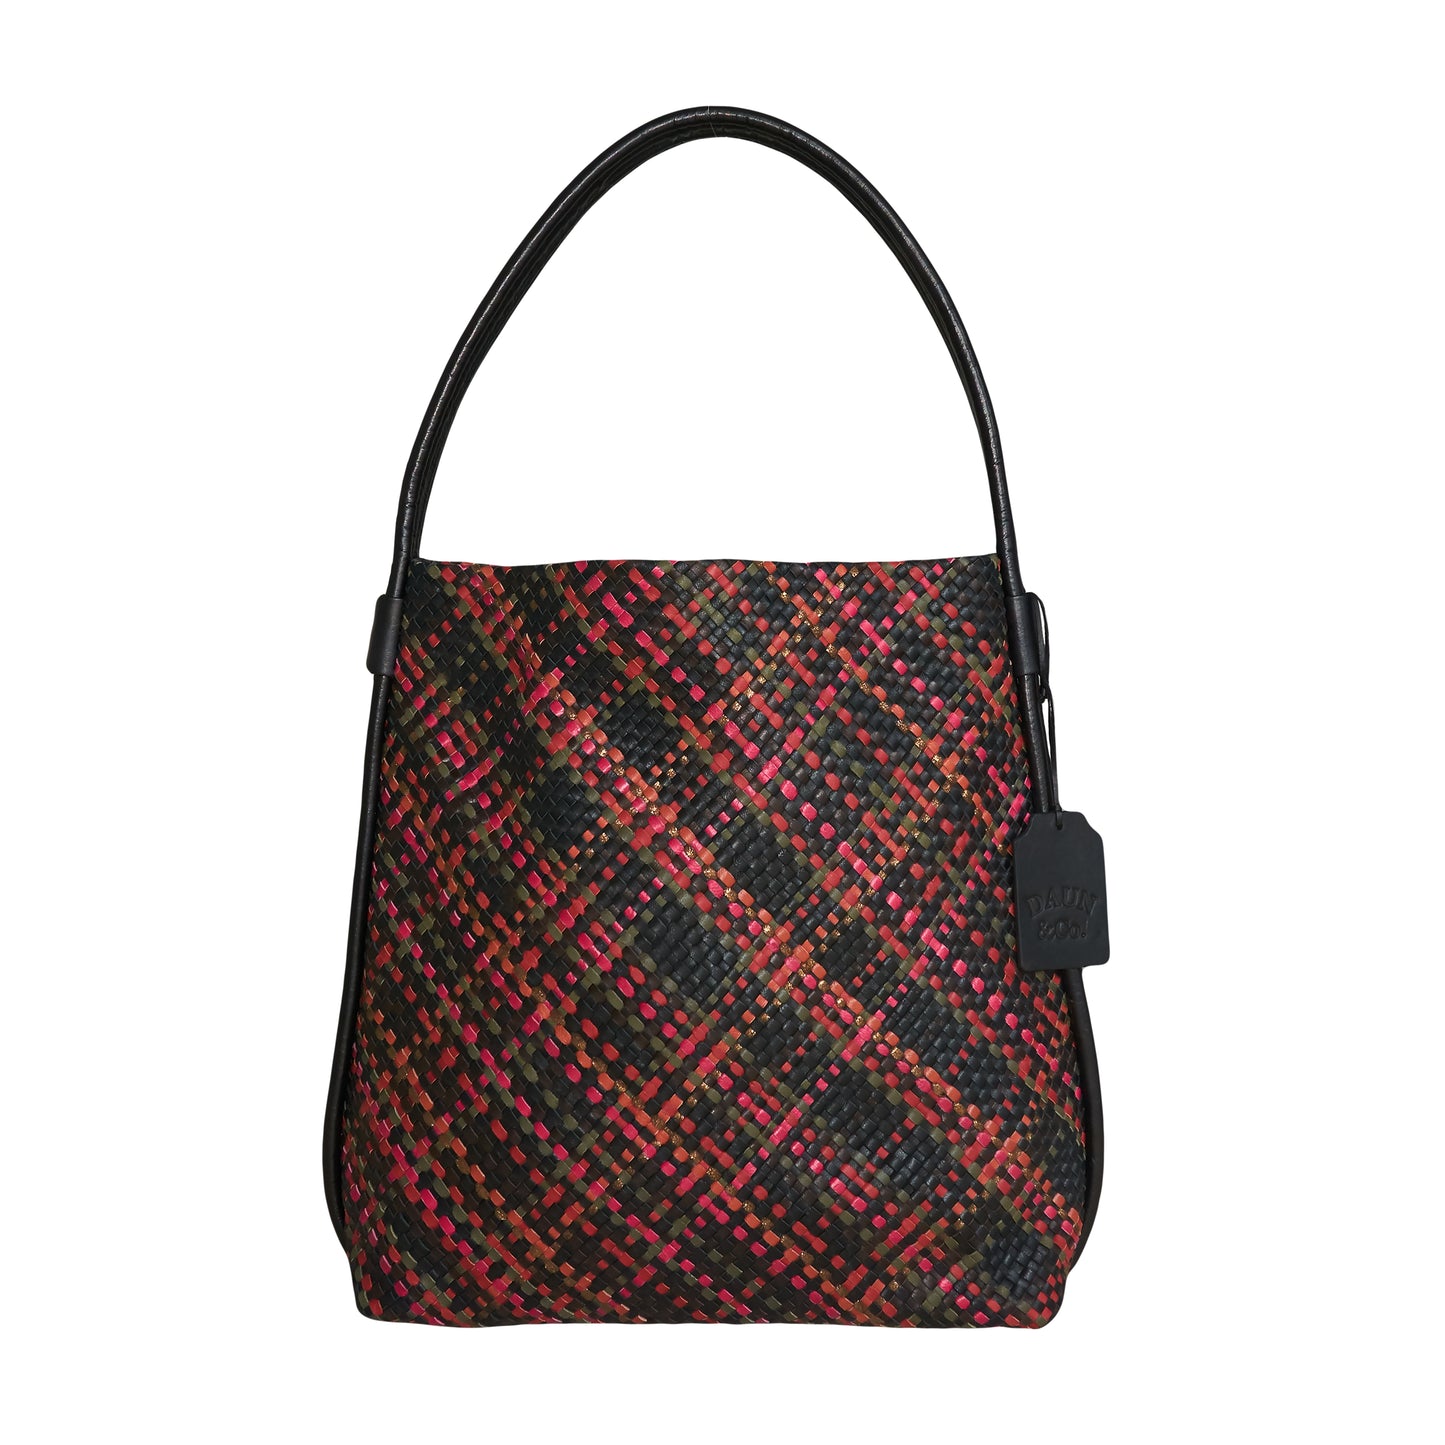 SUP TOTE WOVEN - Genuine Leather